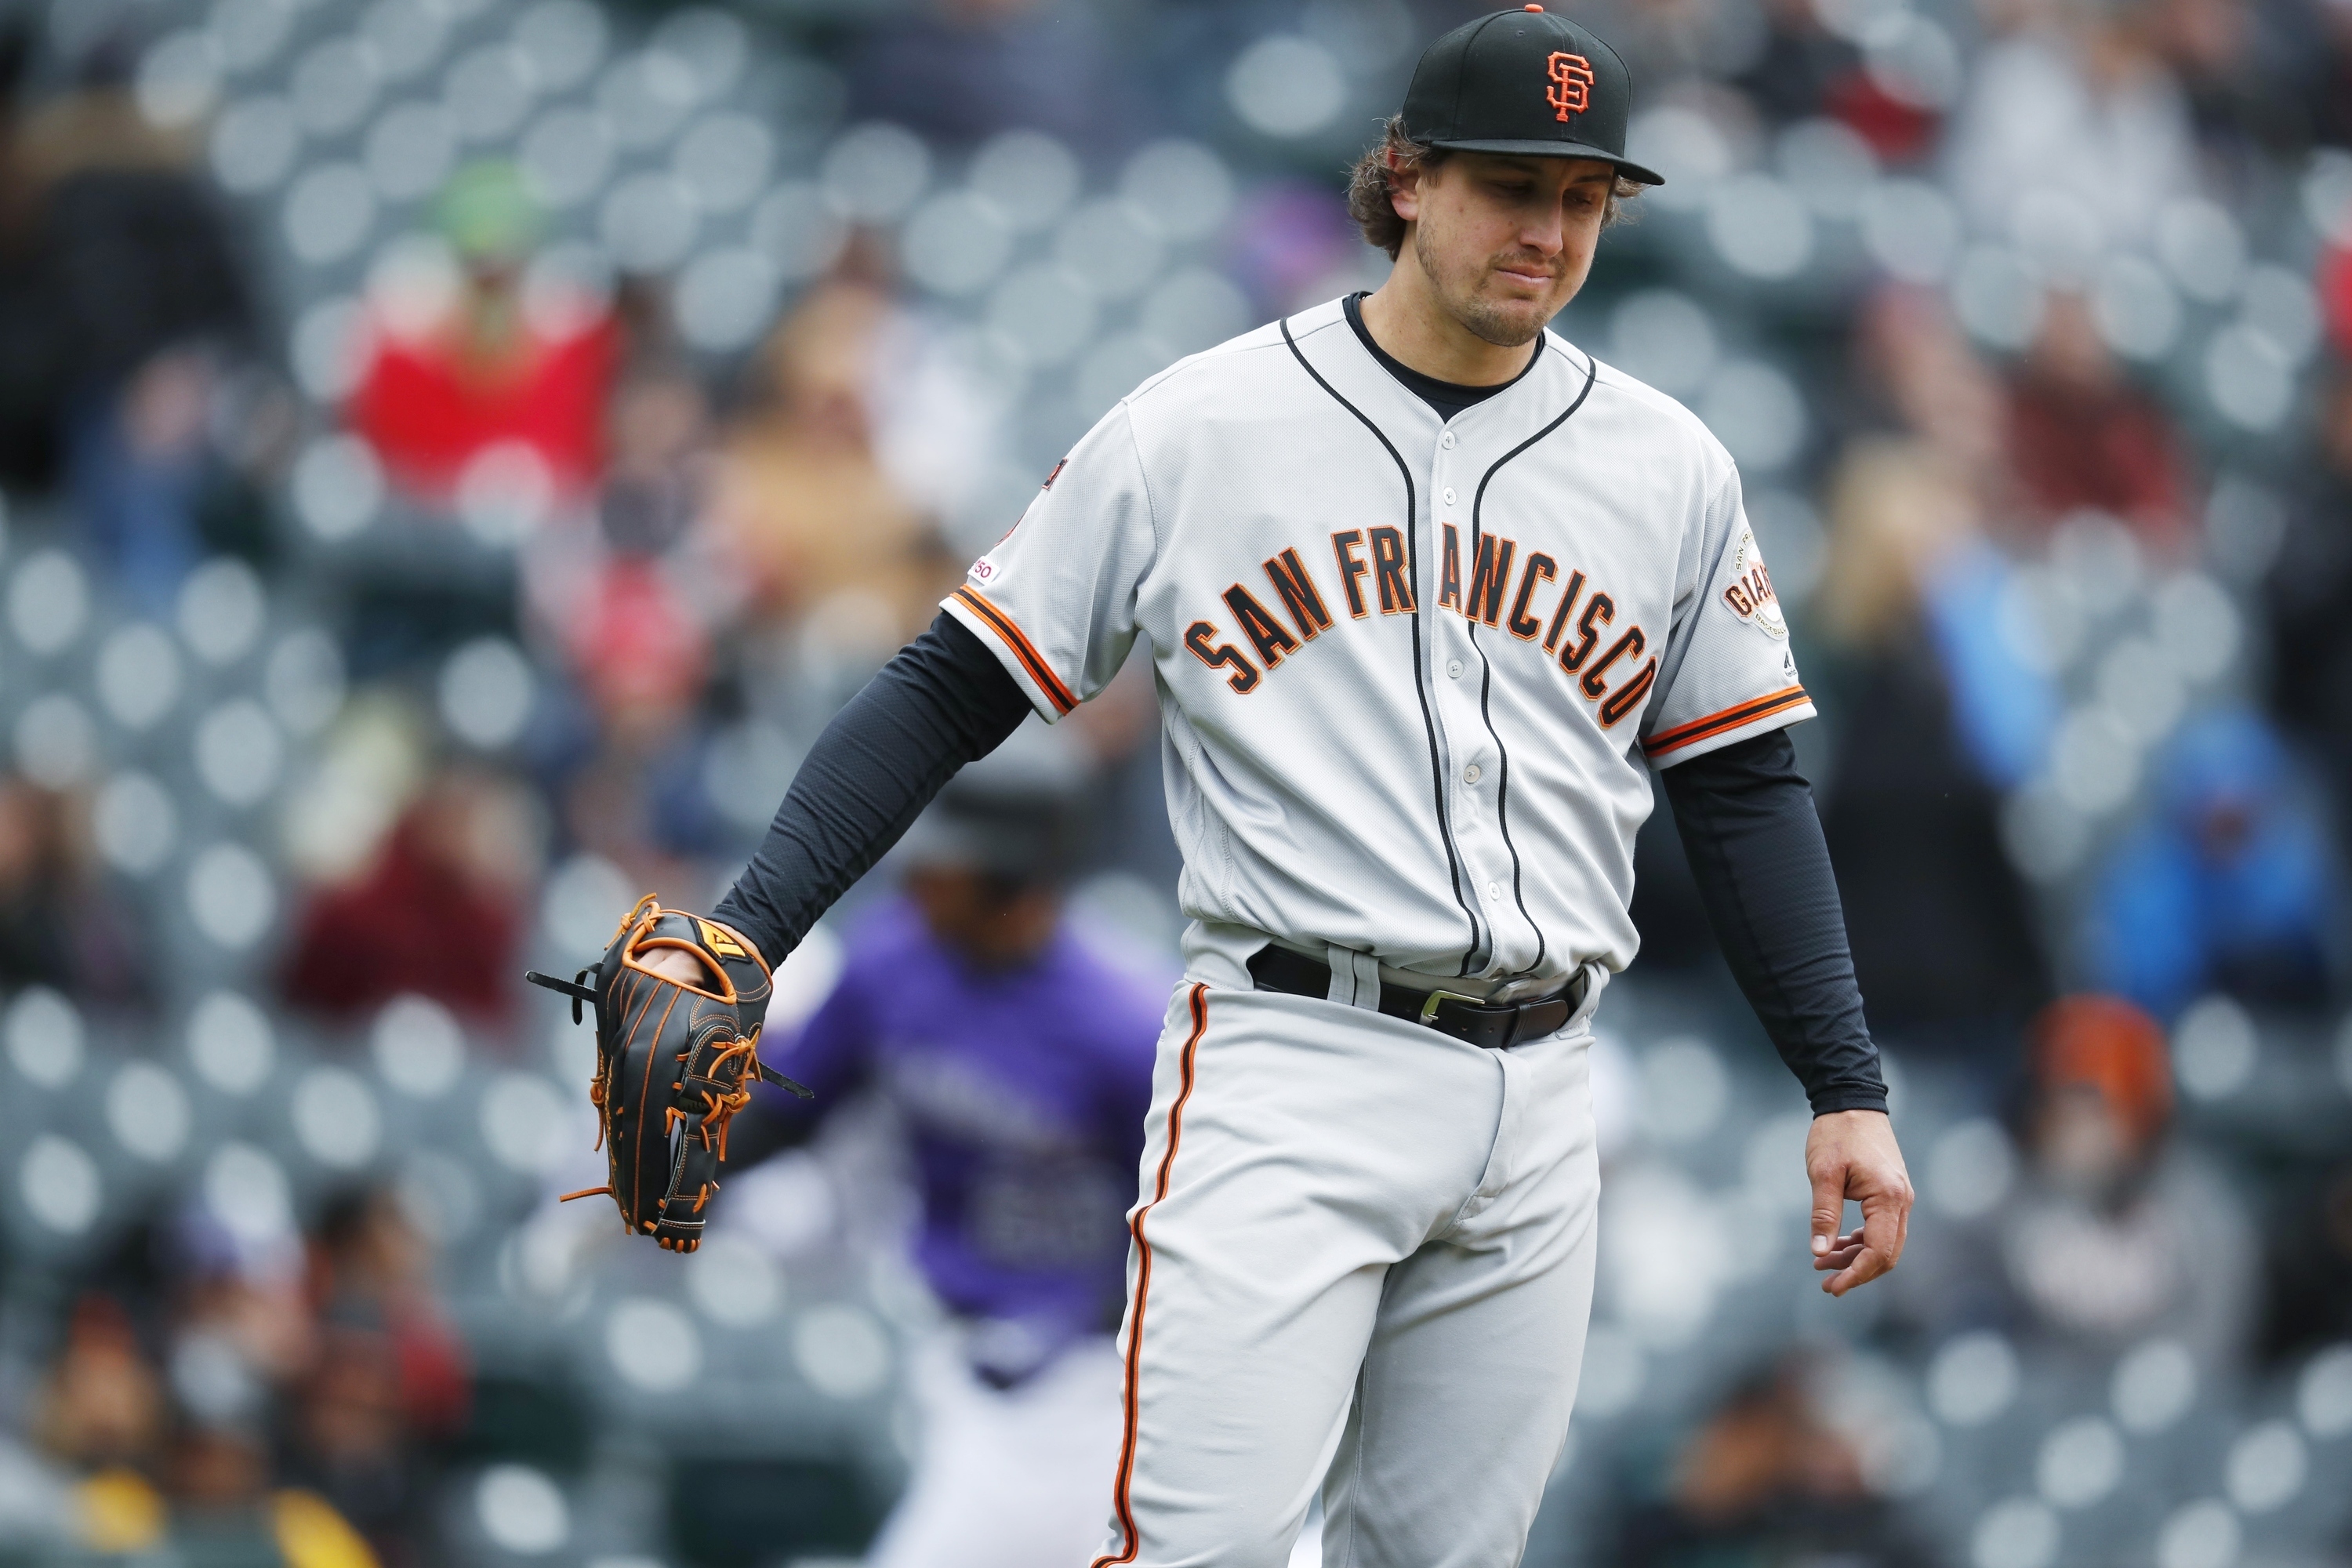 Holland rips Giants' front office, says he faked injury